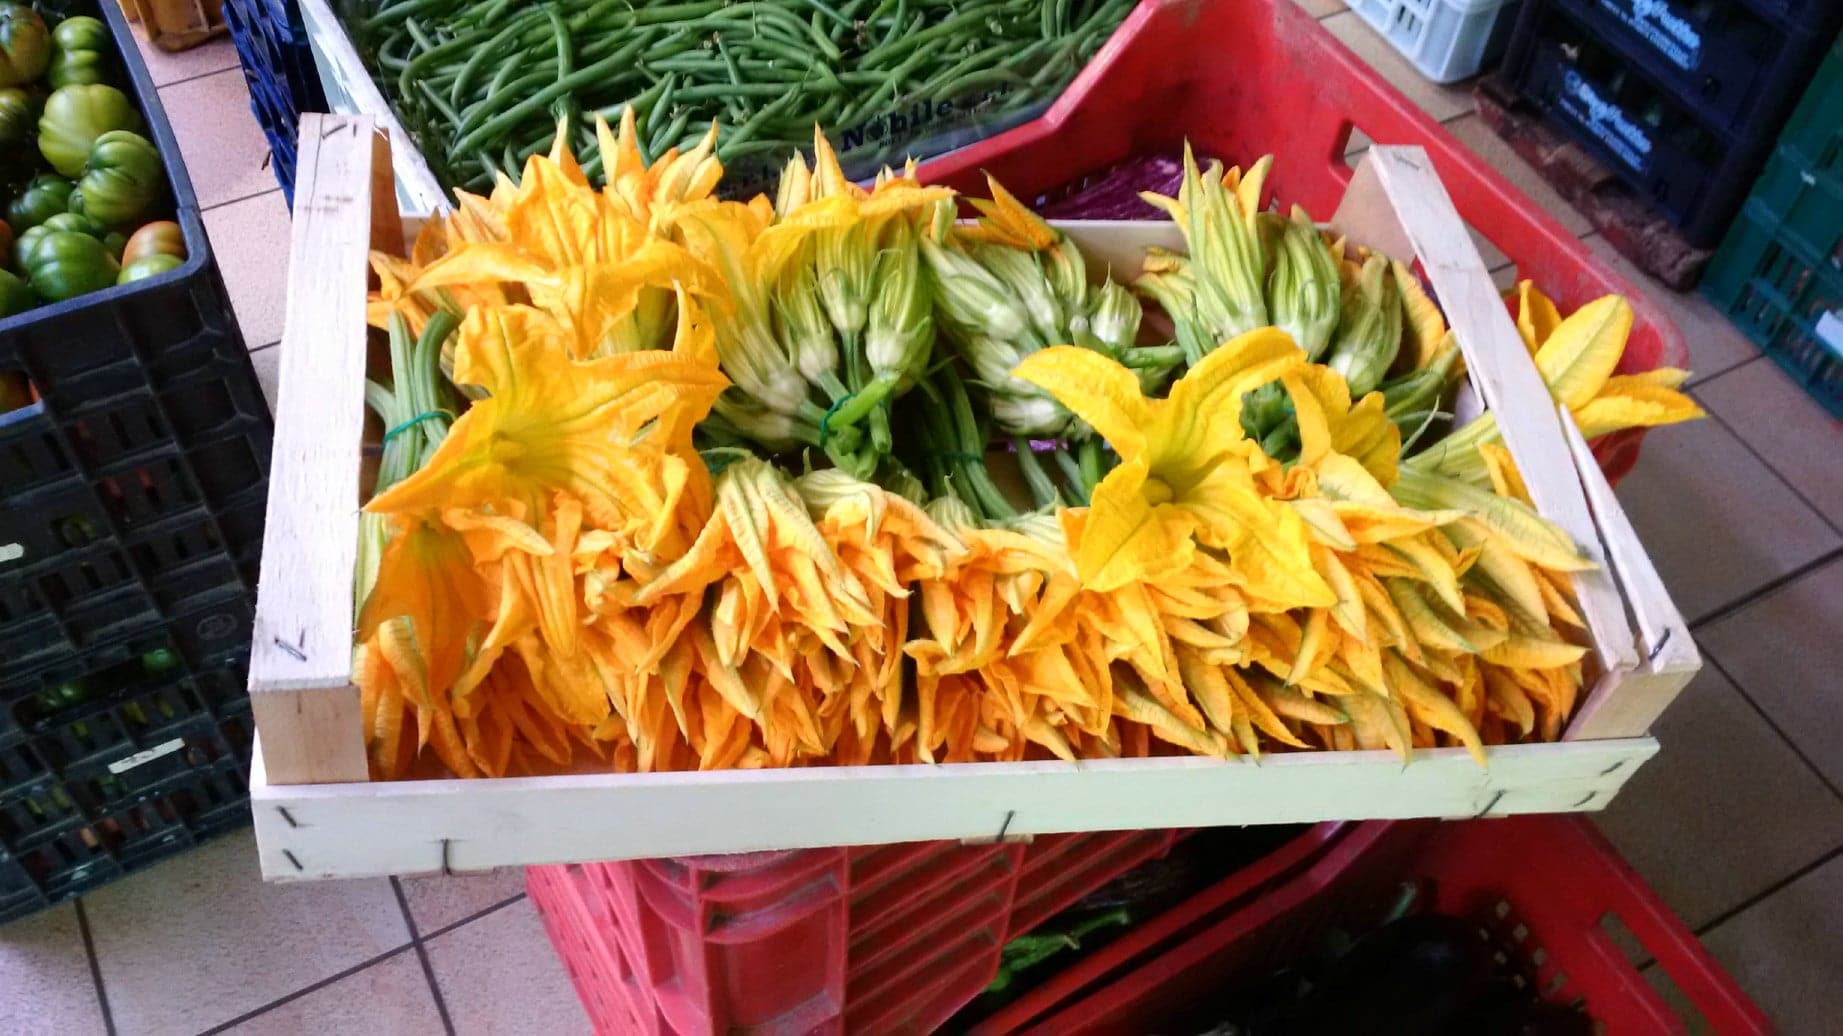 Fresh courgette flowers at the farmer's market